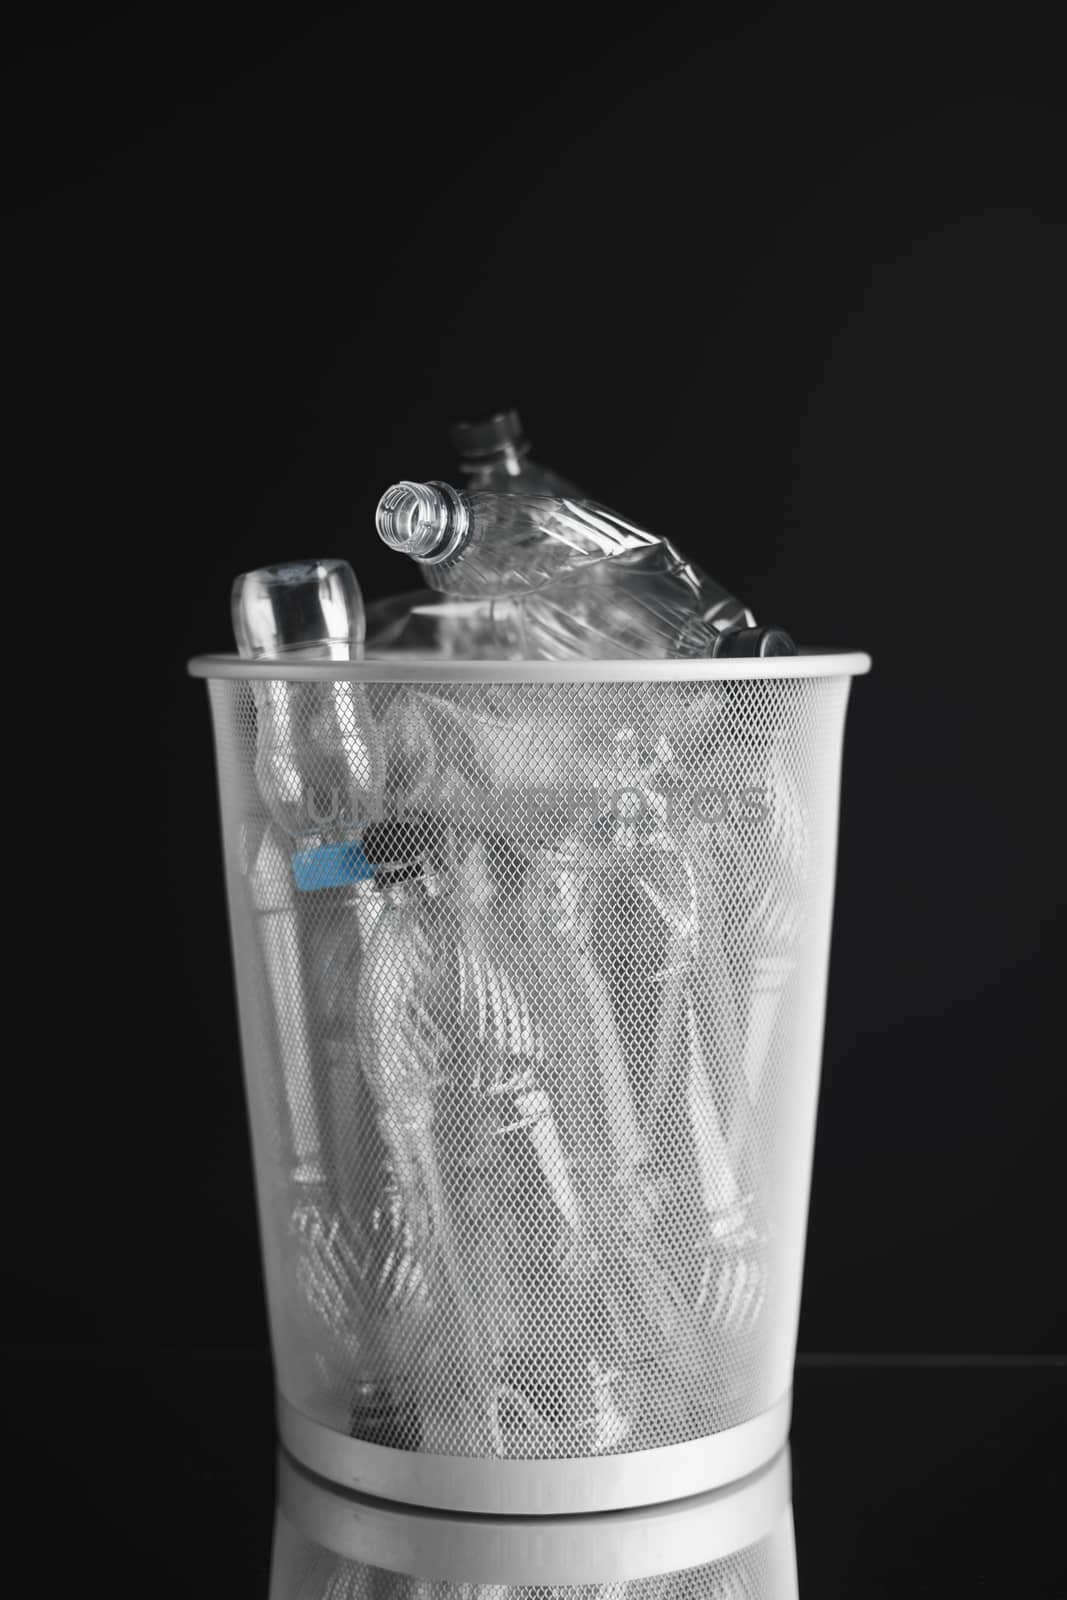 trash can with wasted plastic bottles, black background